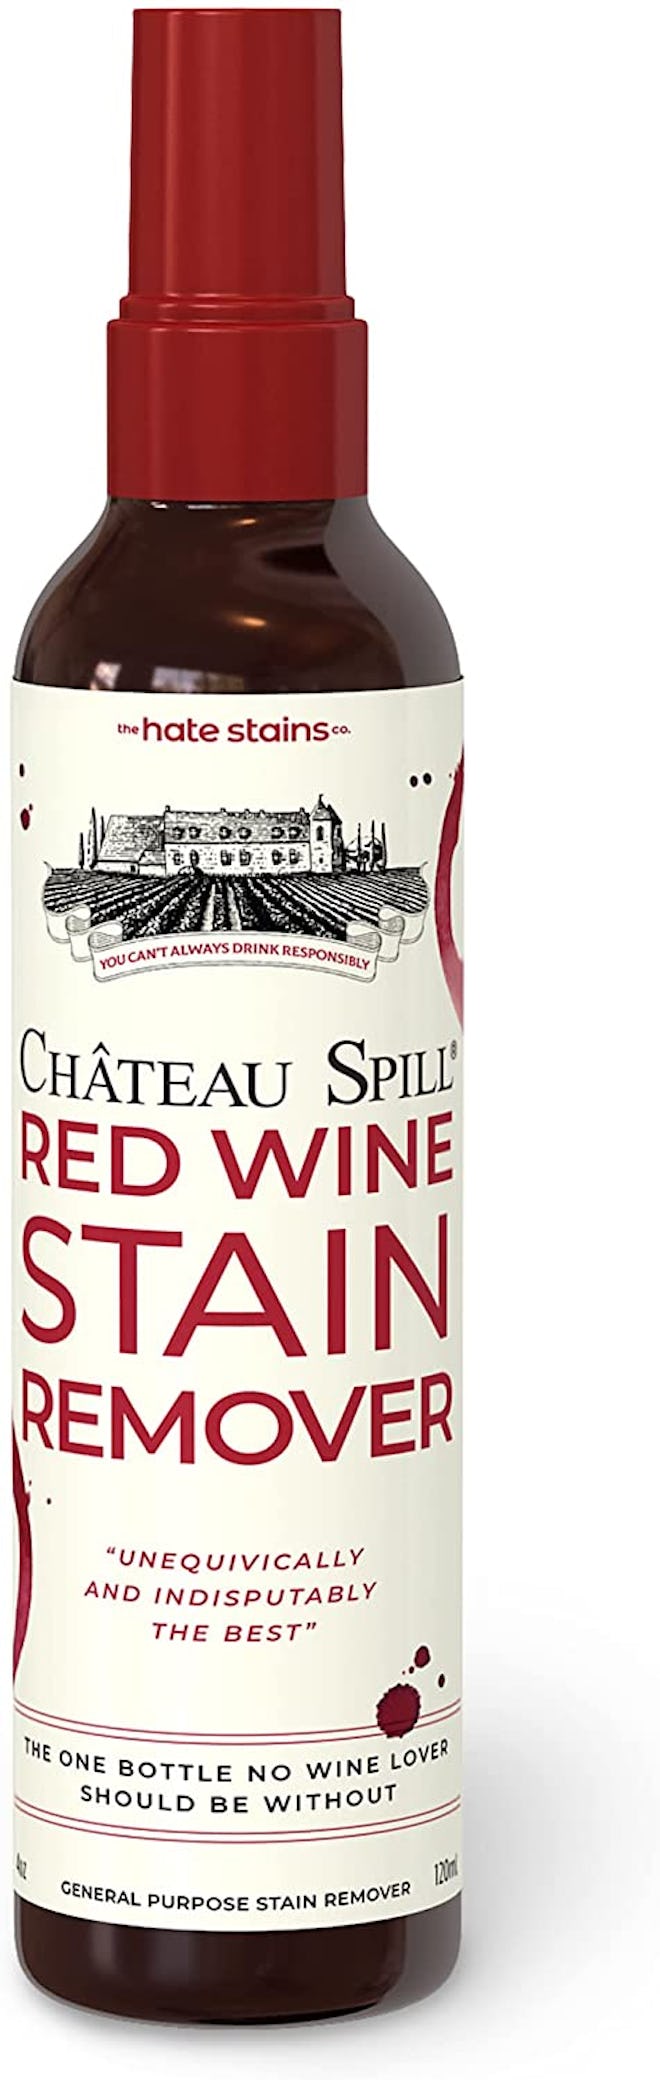 Emergency Stain Rescue Chateau Spill Red Wine Stain Remover